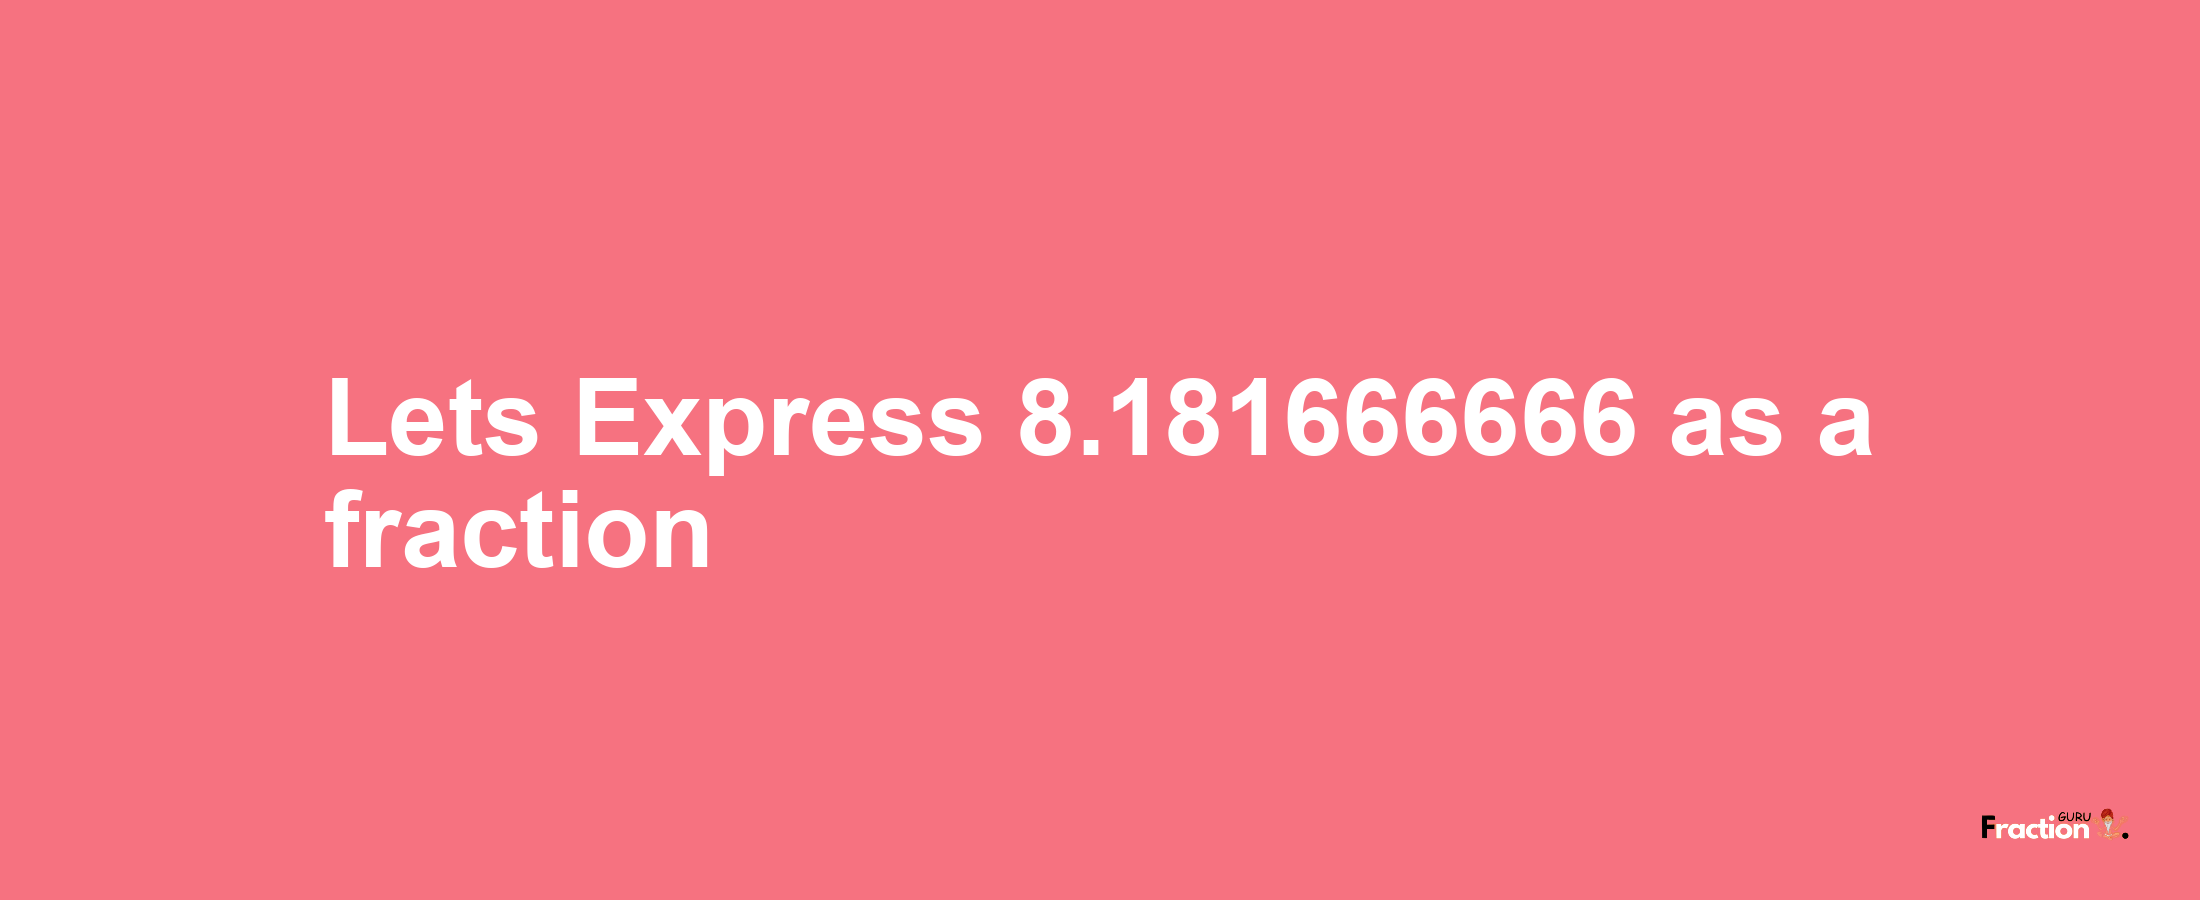 Lets Express 8.181666666 as afraction